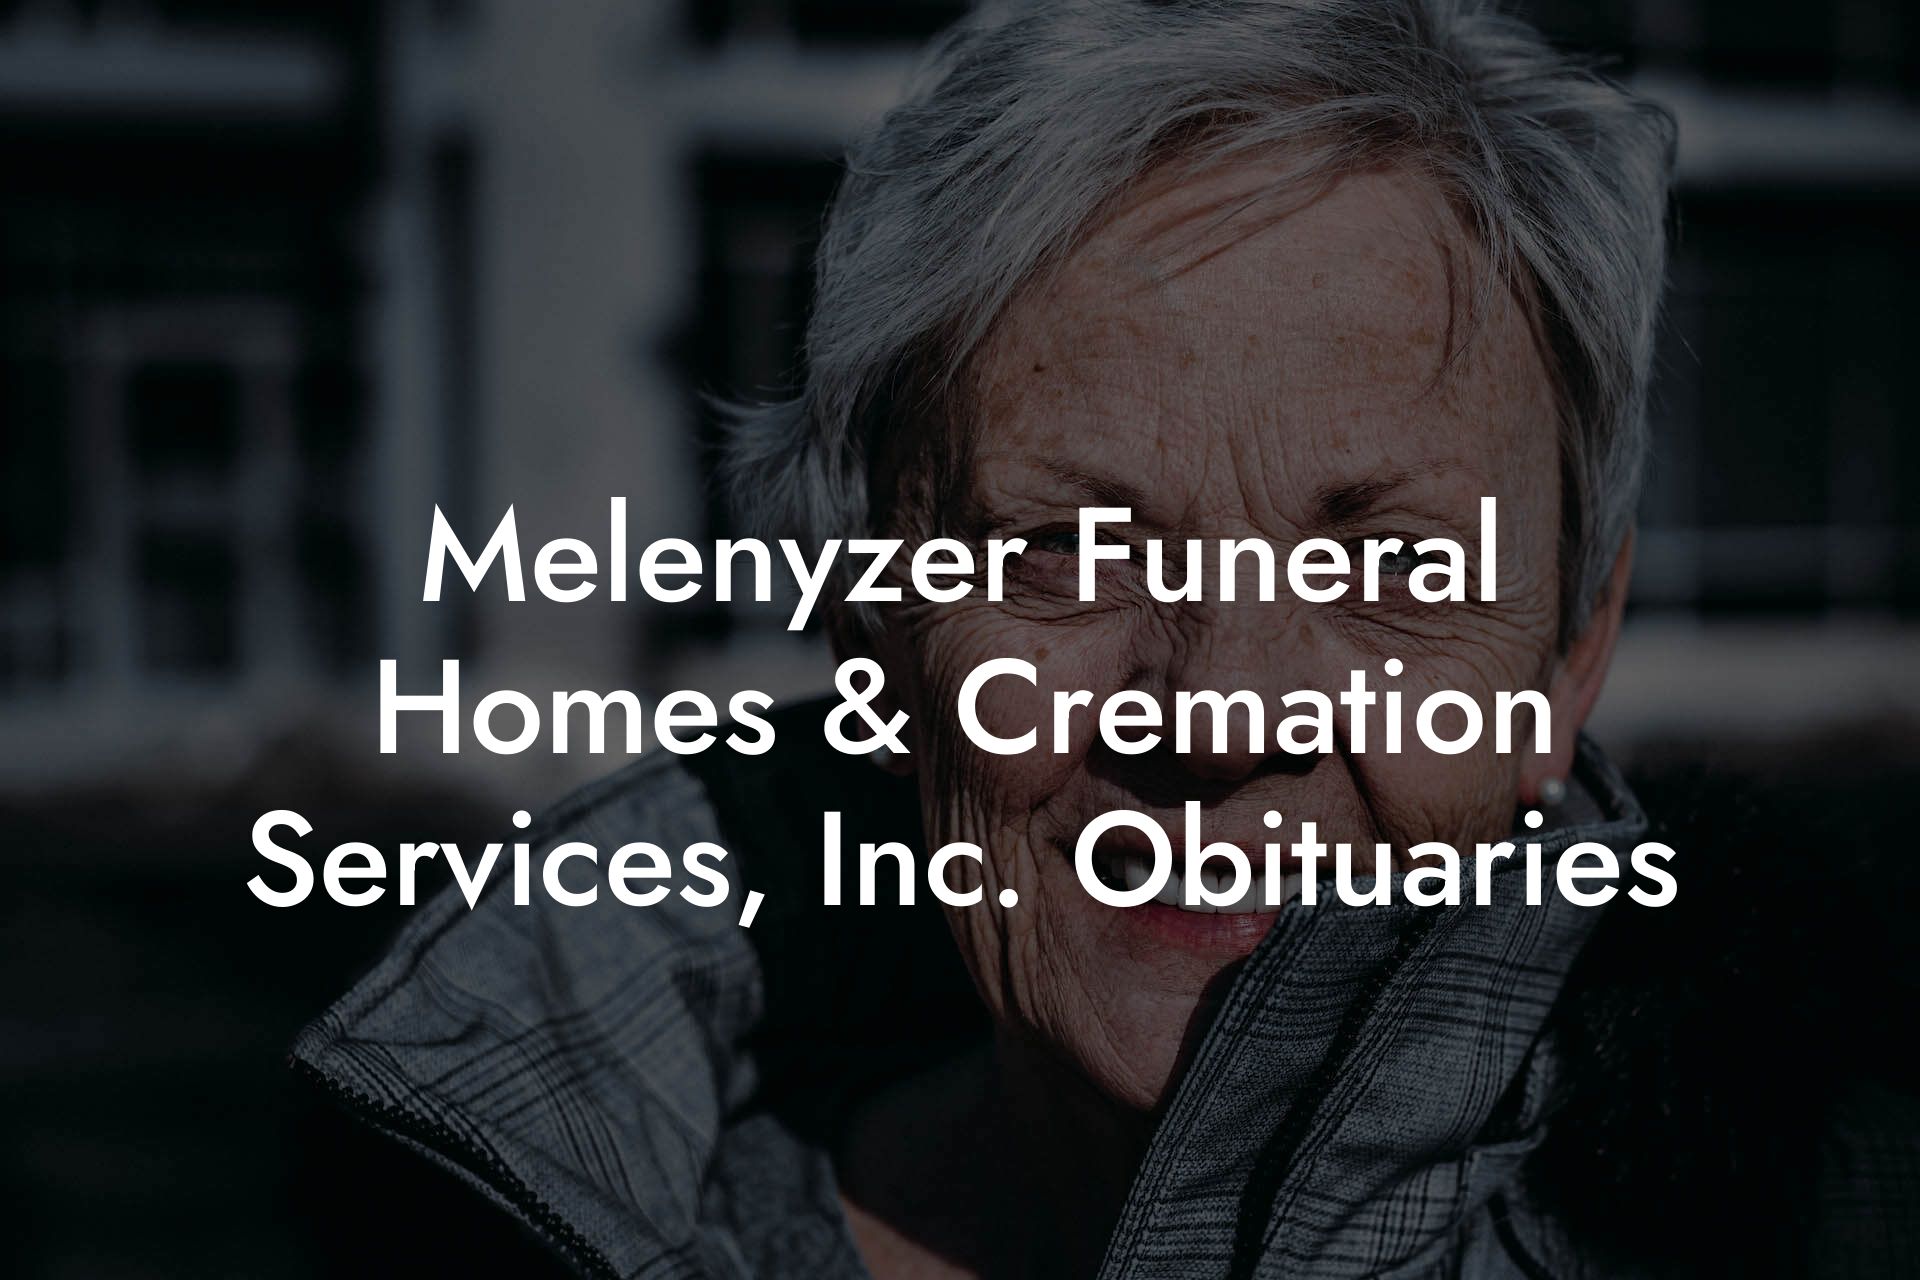 Melenyzer Funeral Homes & Cremation Services, Inc. Obituaries